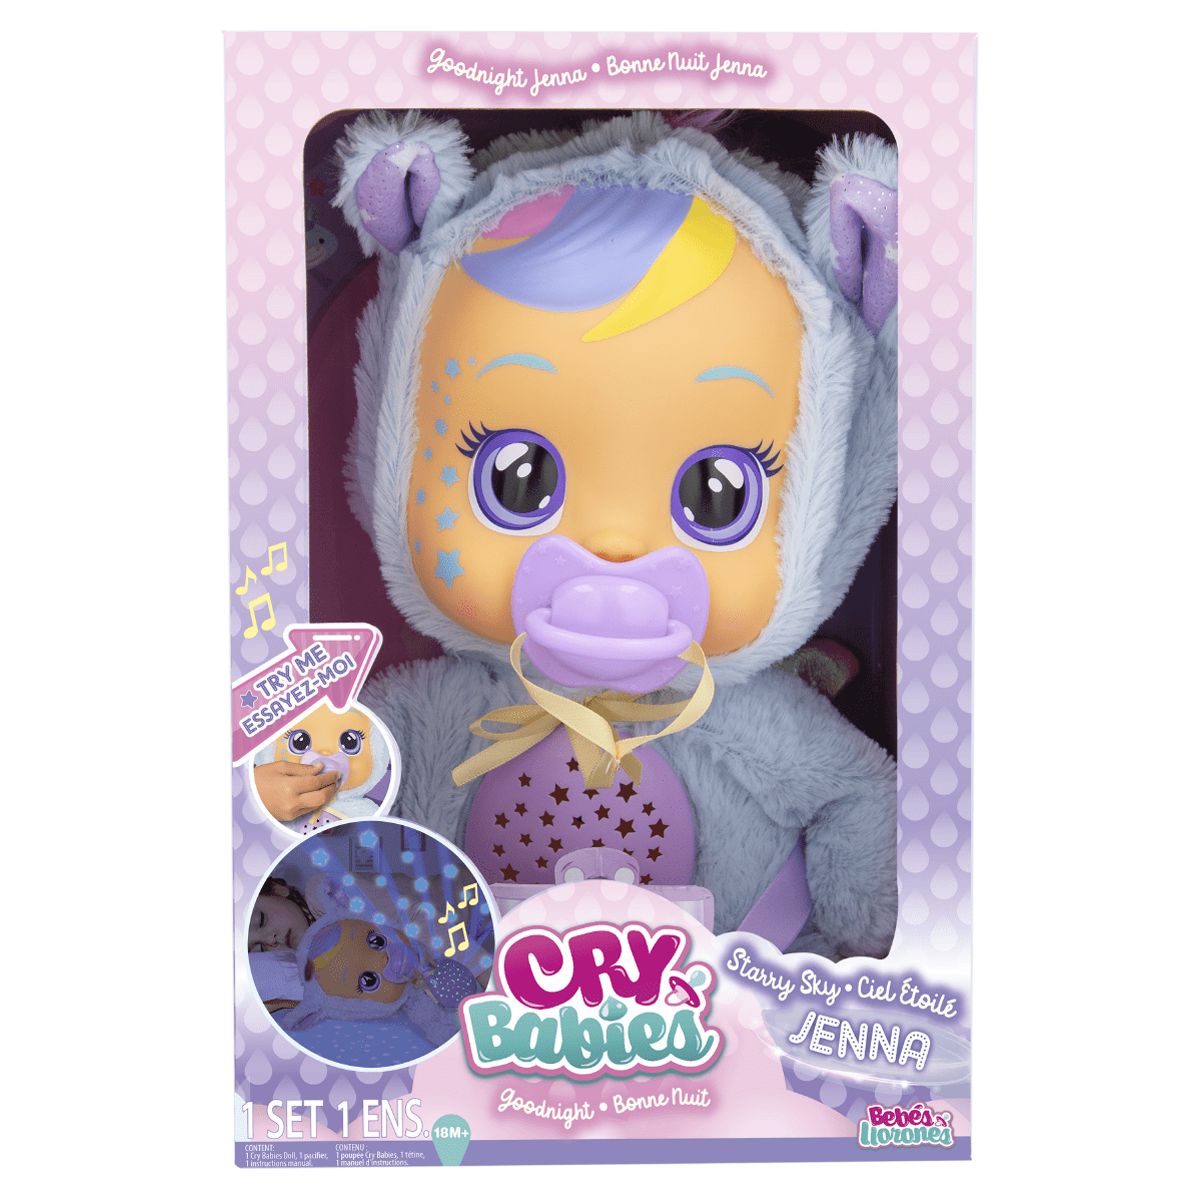 Cry Babies Goodnight Starry Sky Jenna 12 inch Doll with Starry Sky Projection! - image 8 of 10